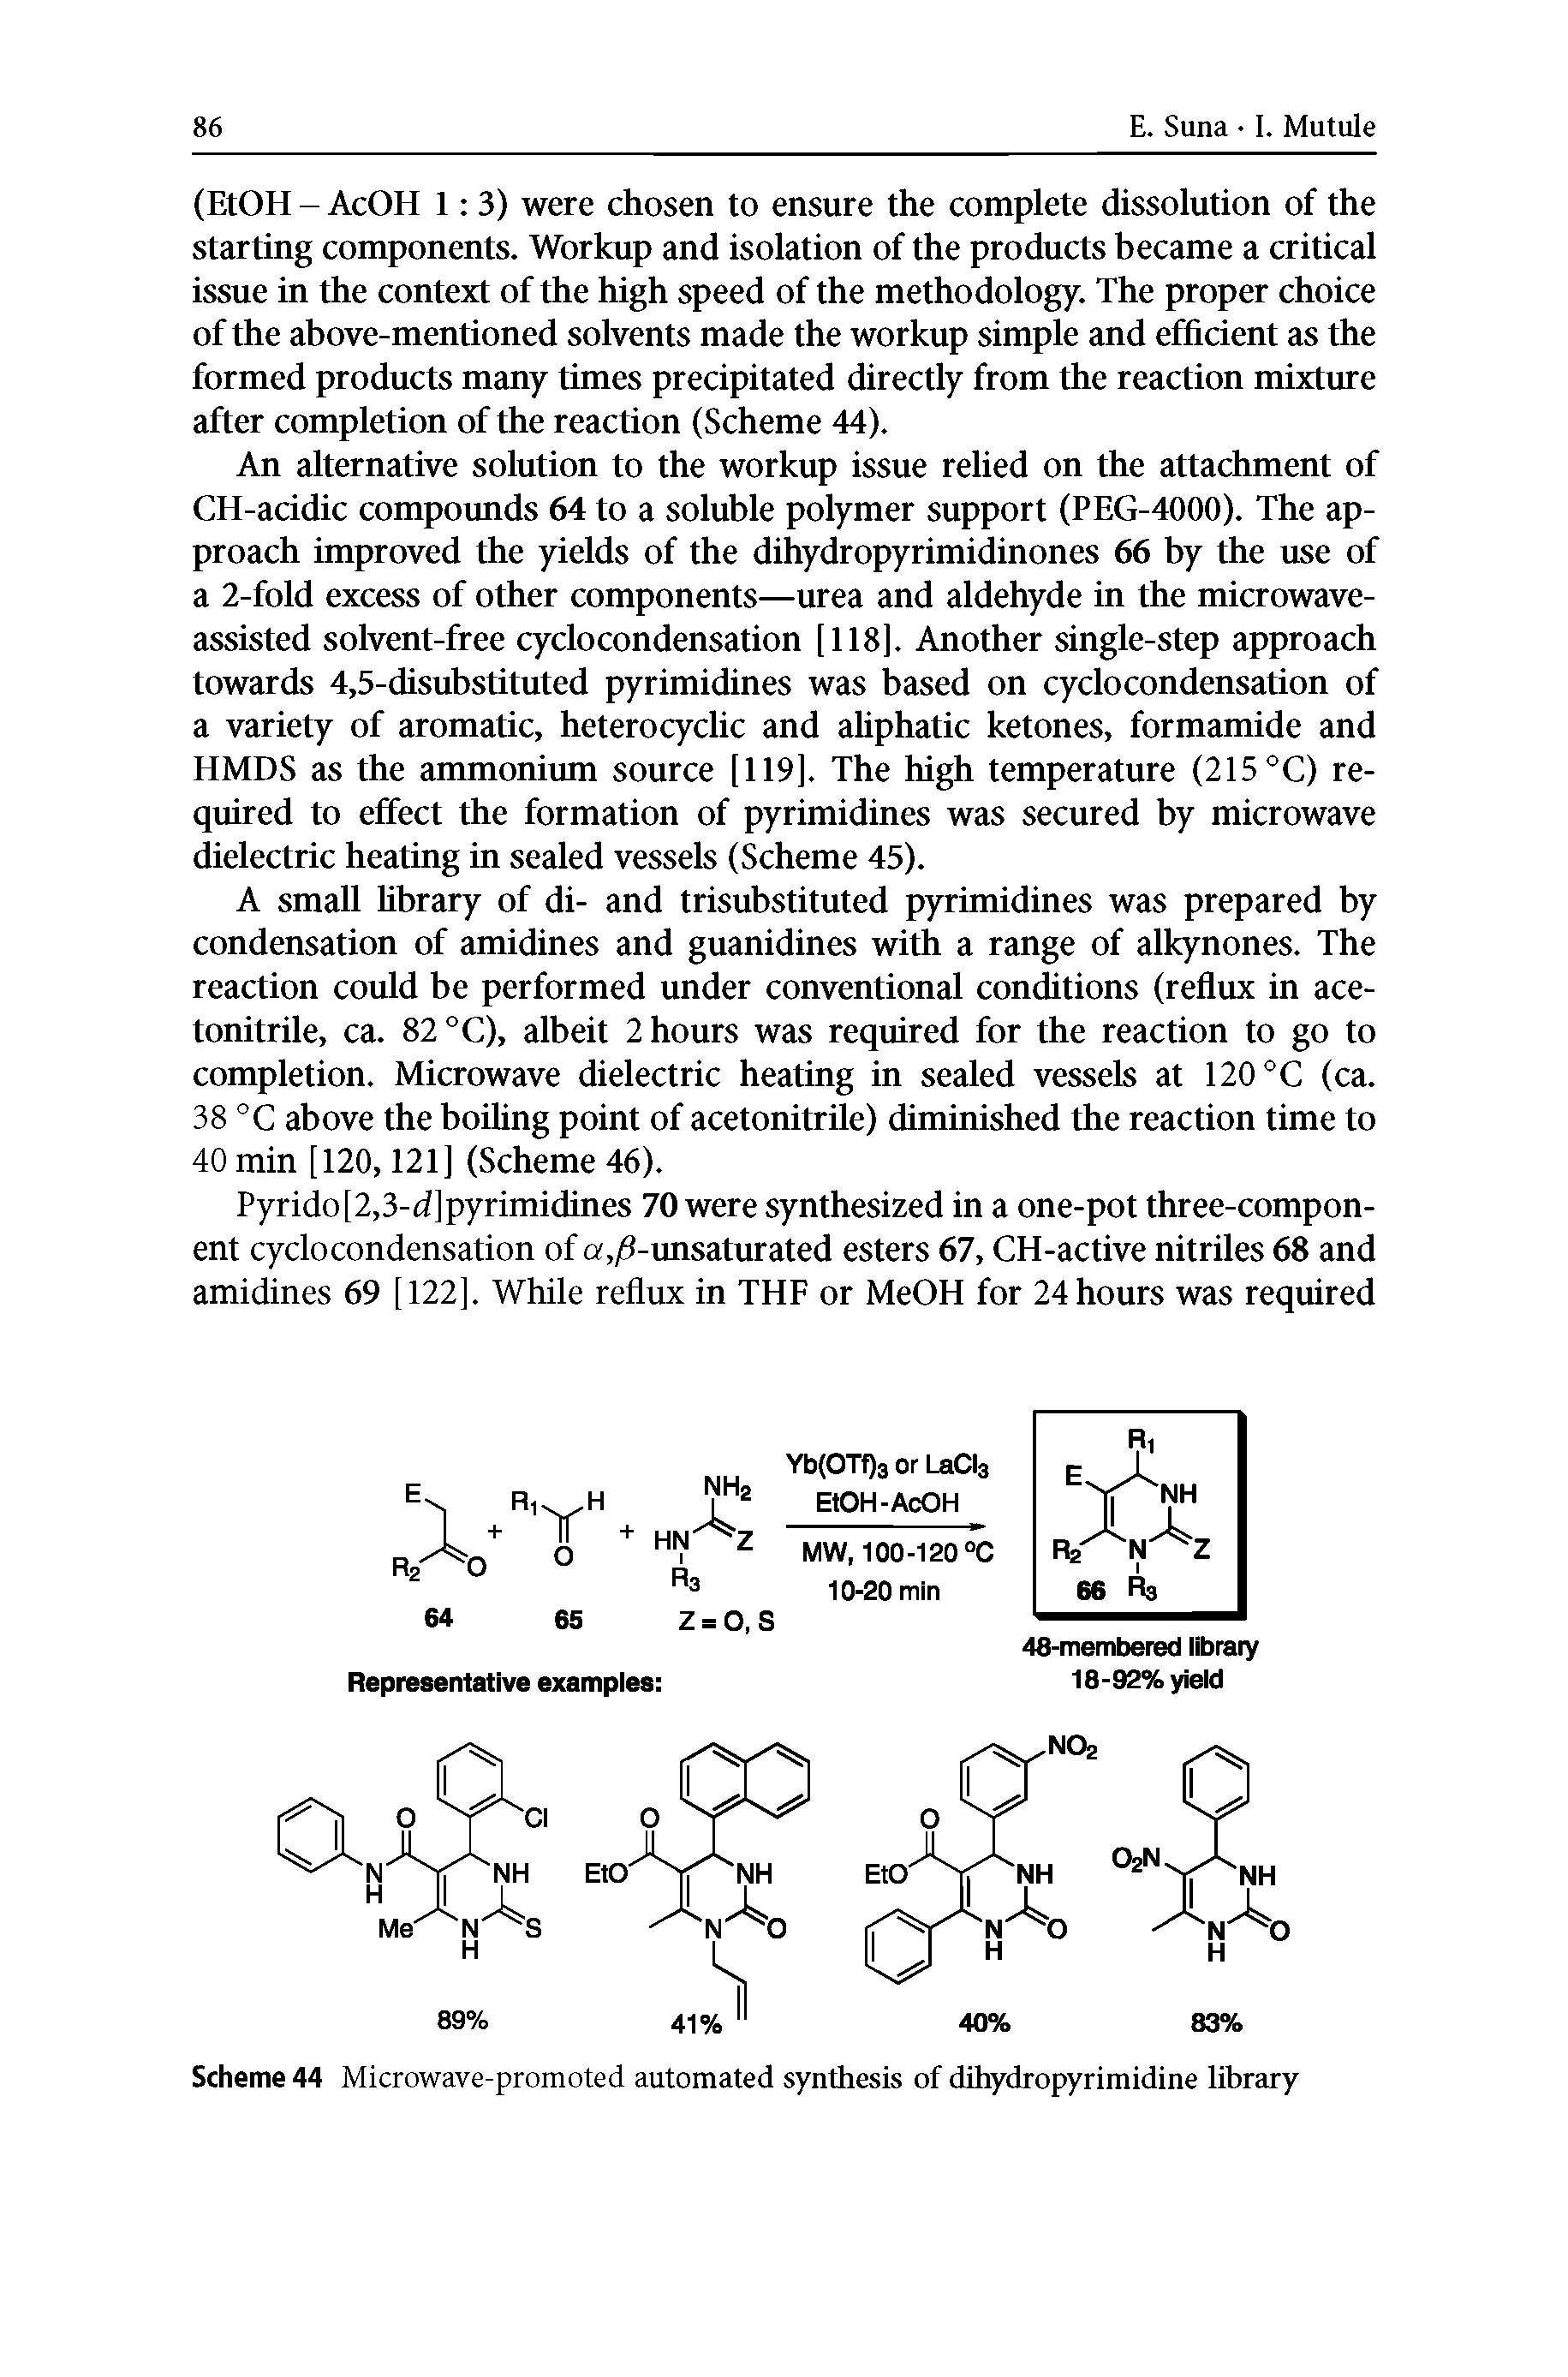 Scheme 44 Microwave-promoted automated synthesis of dihydropyrimidine library...